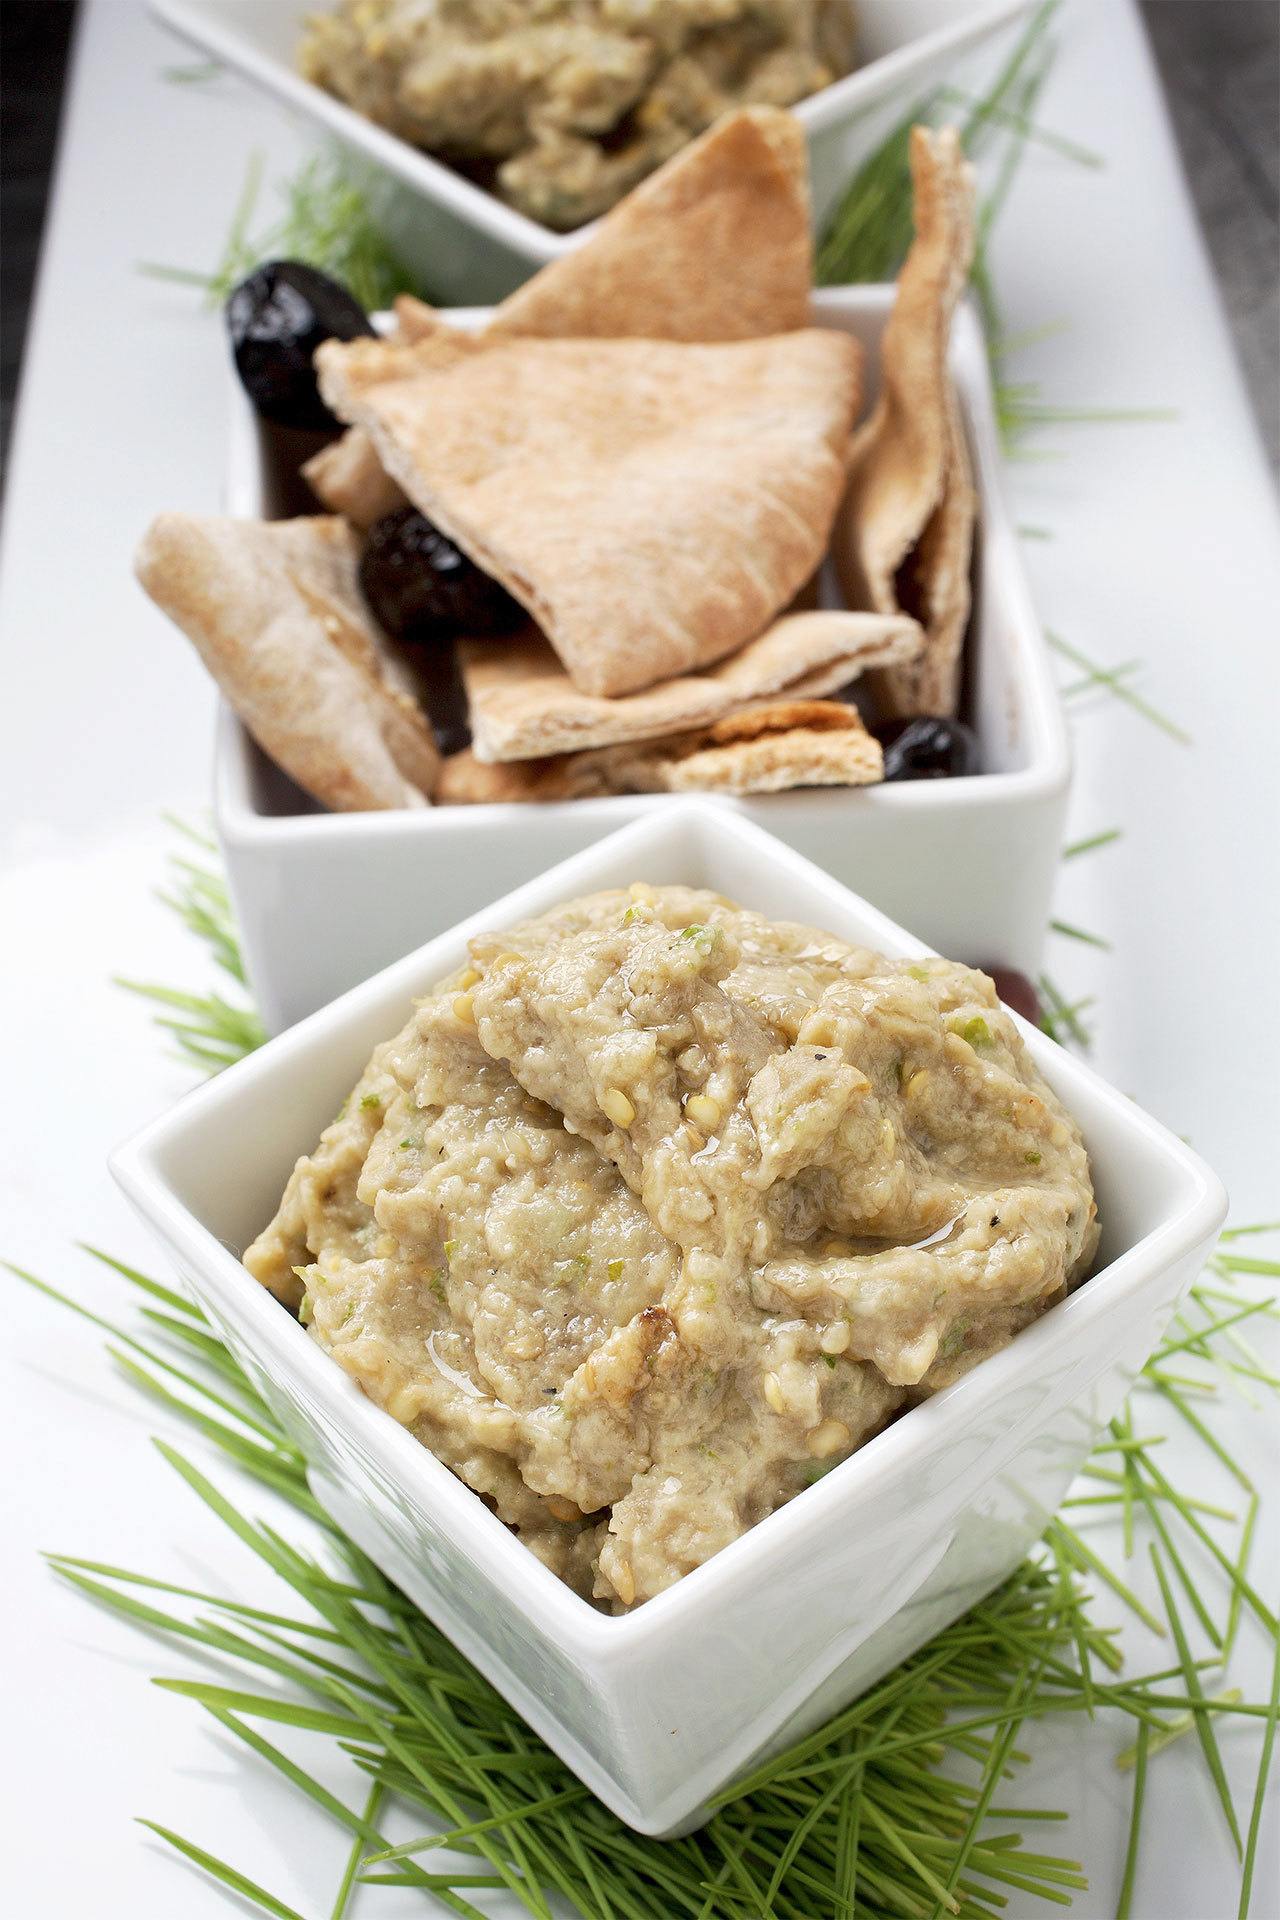 Baba ghanoush is a Middle Eastern dip that is ready to share the spotlight with hummus. (Photo by Deb Lindsey For The Washington Post)